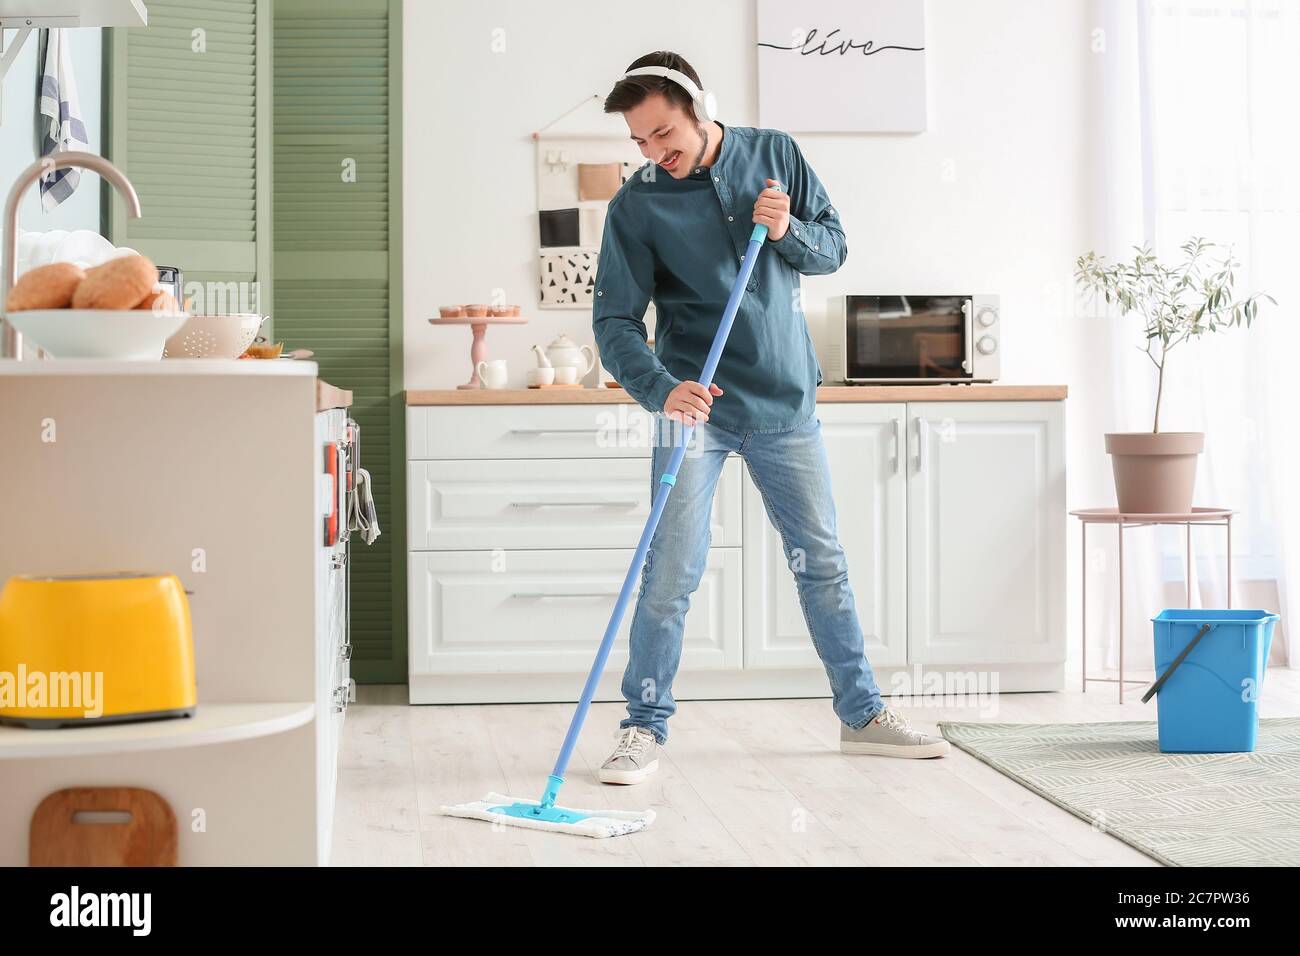 Handsome young man mopping floor in kitchen Stock Photo